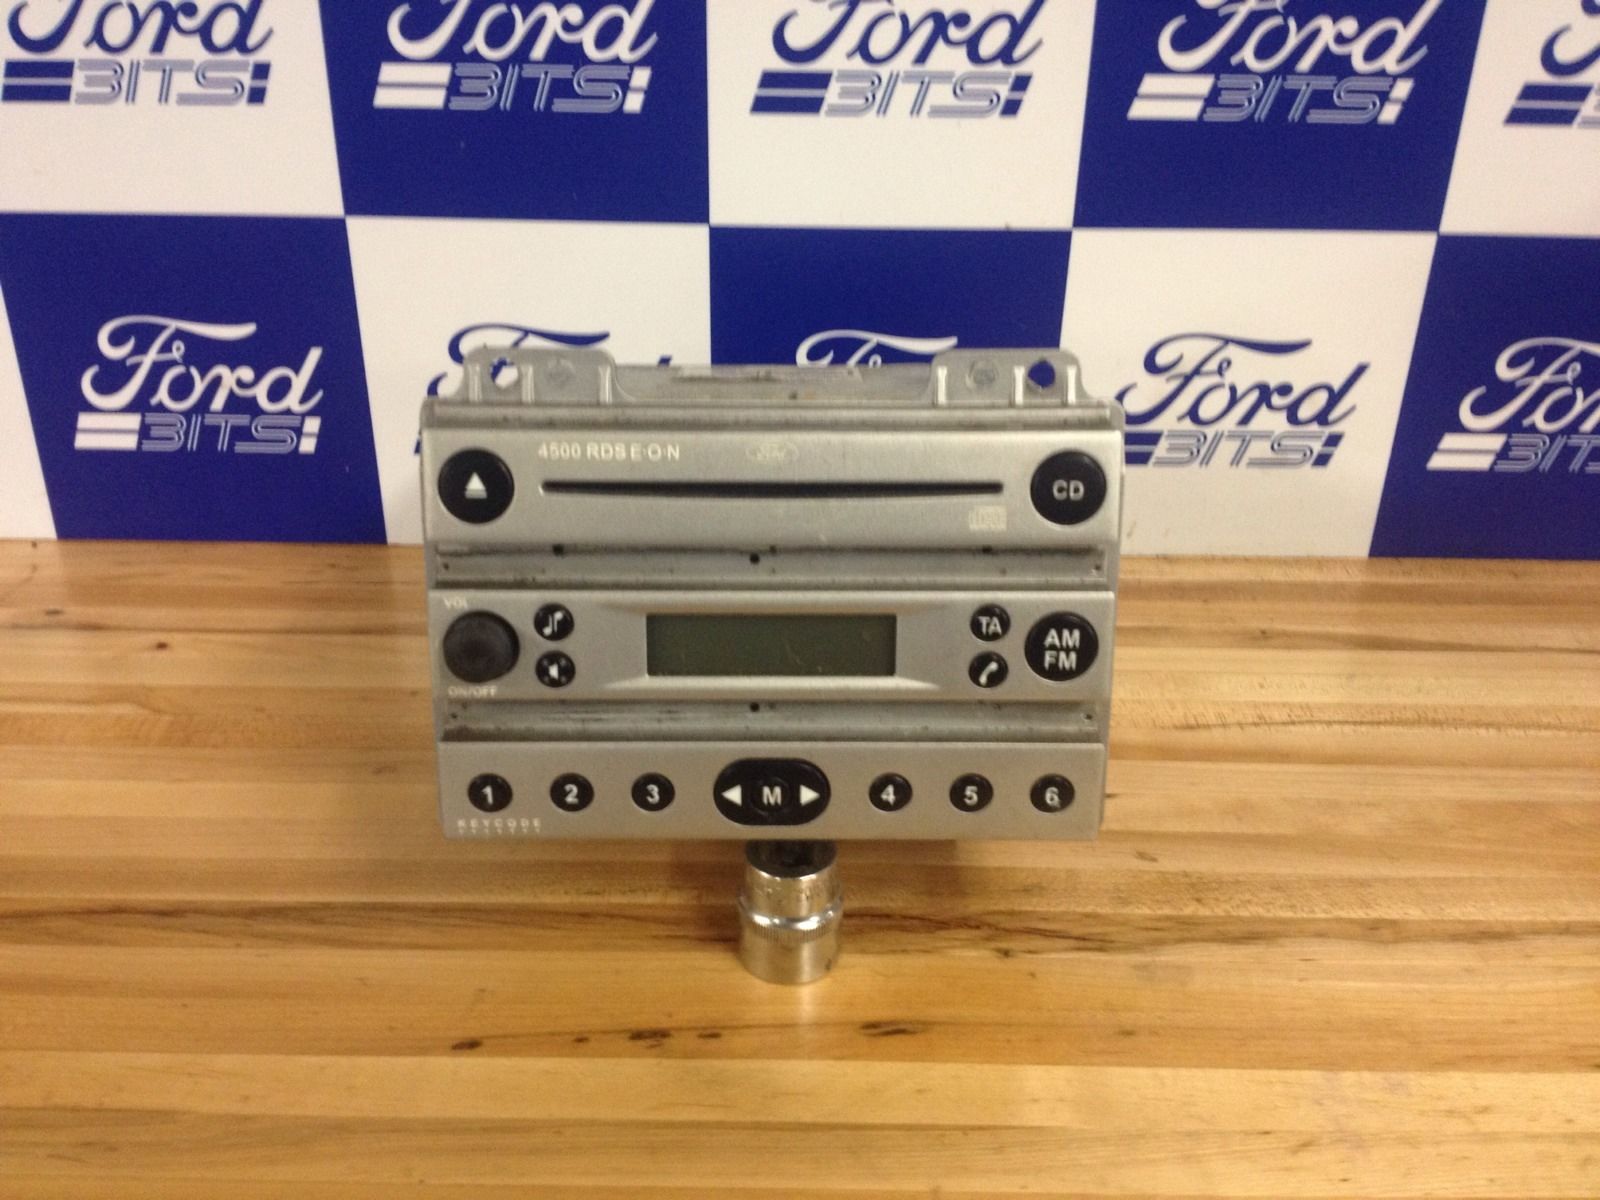 Ford 4500 cd player code #7